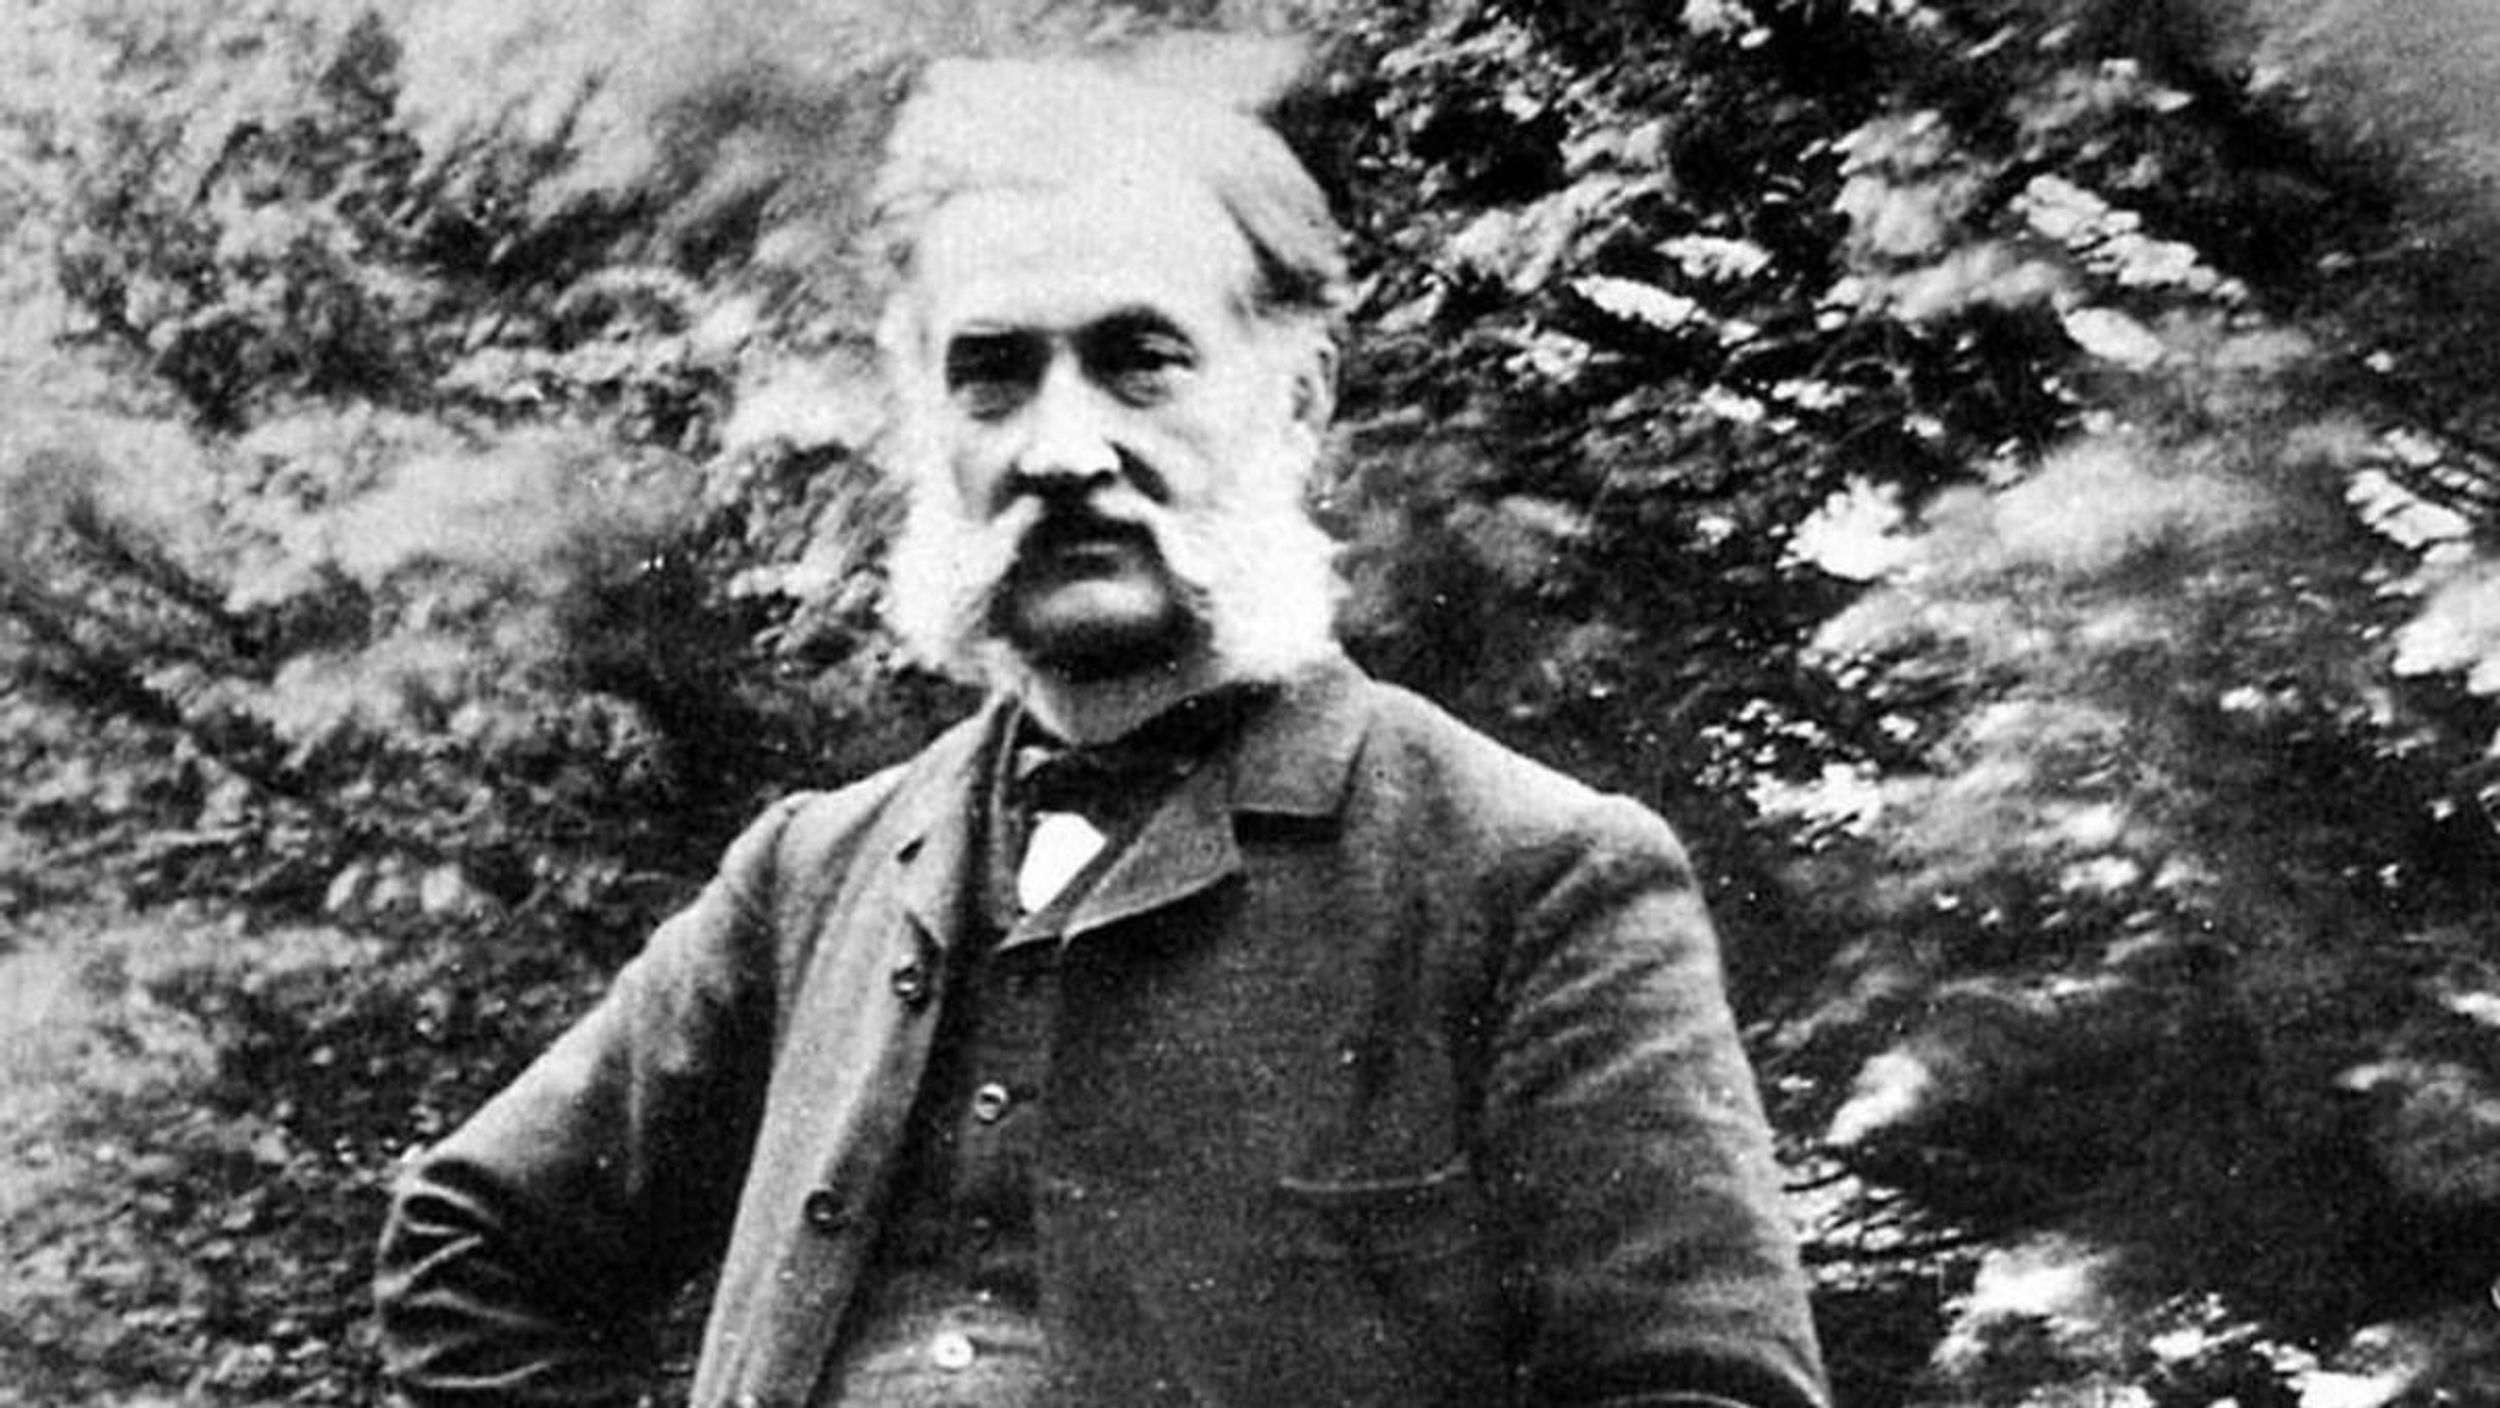 Louis Le Prince: The inventor of the first moving picture camera